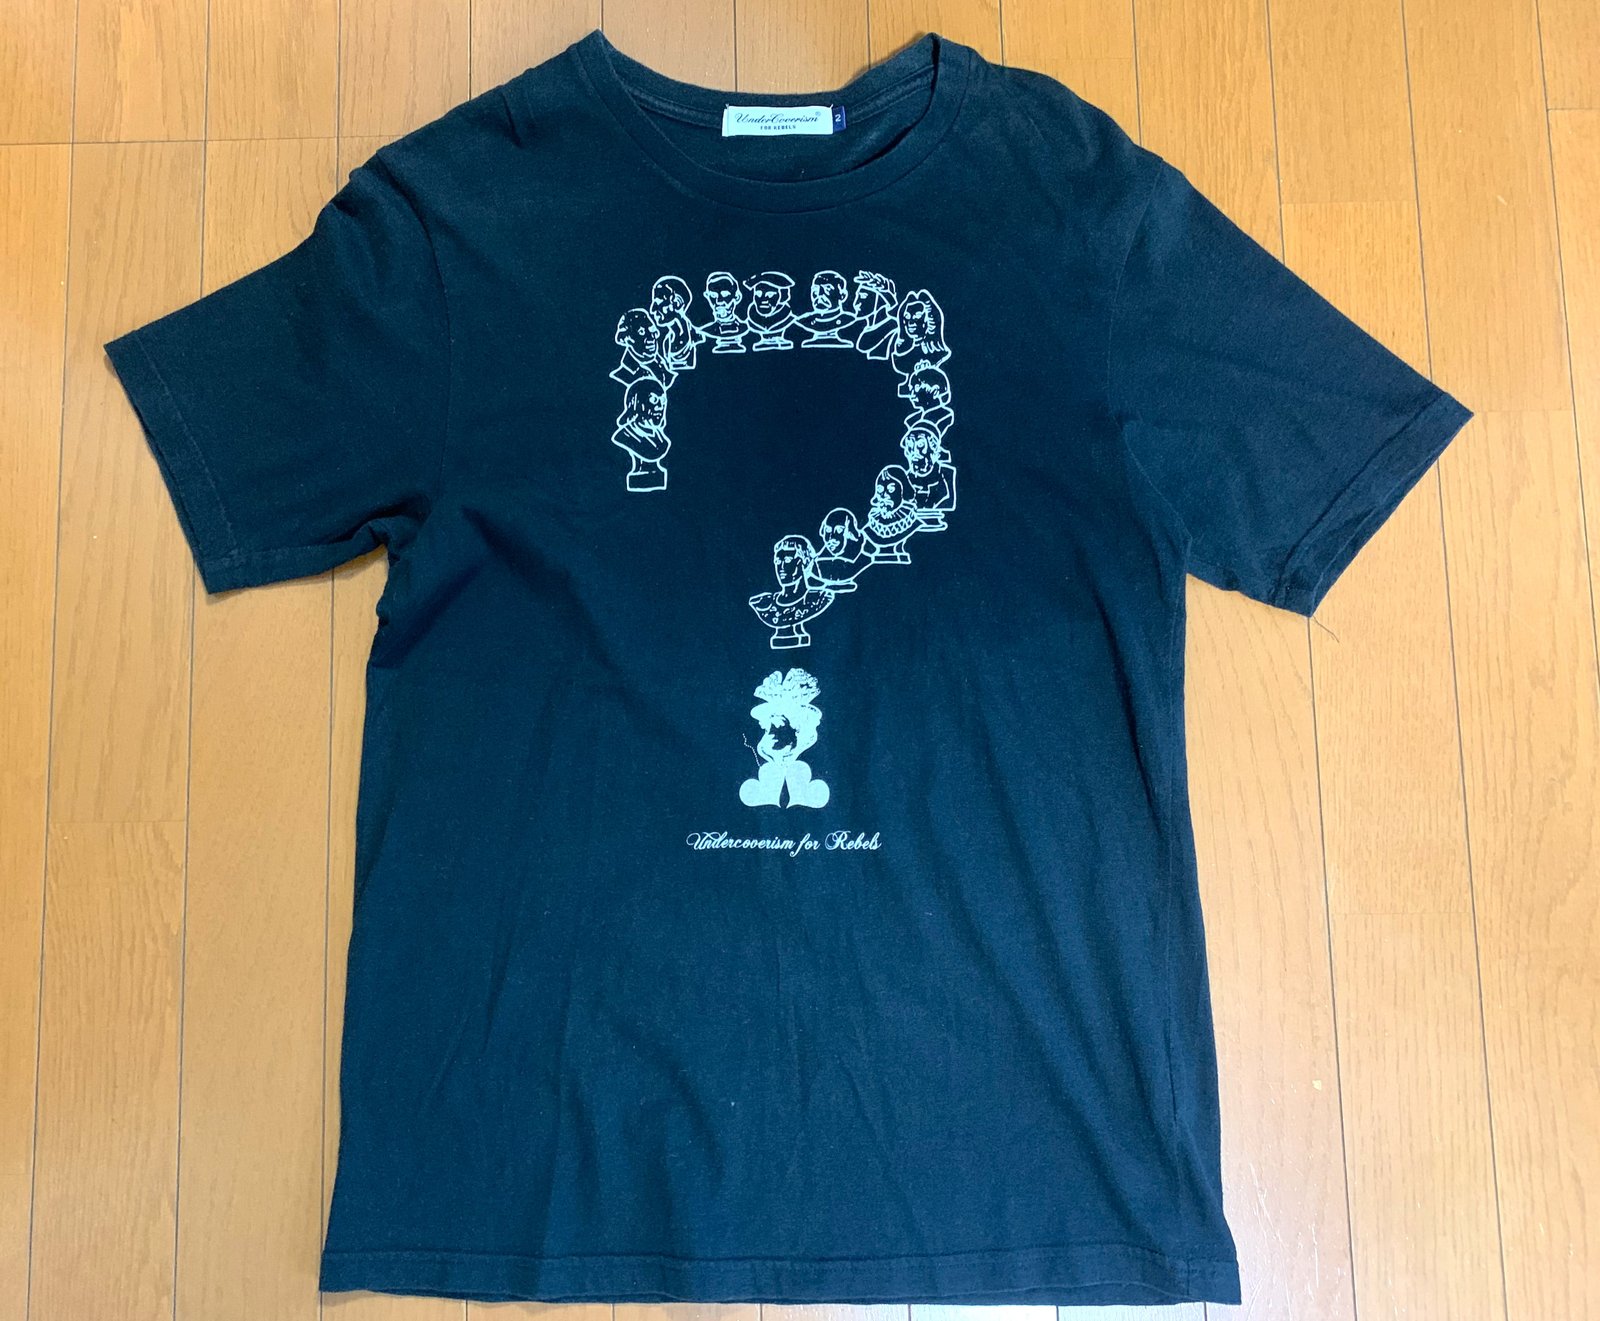 Undercoverism undercover question mark printed t-shirt